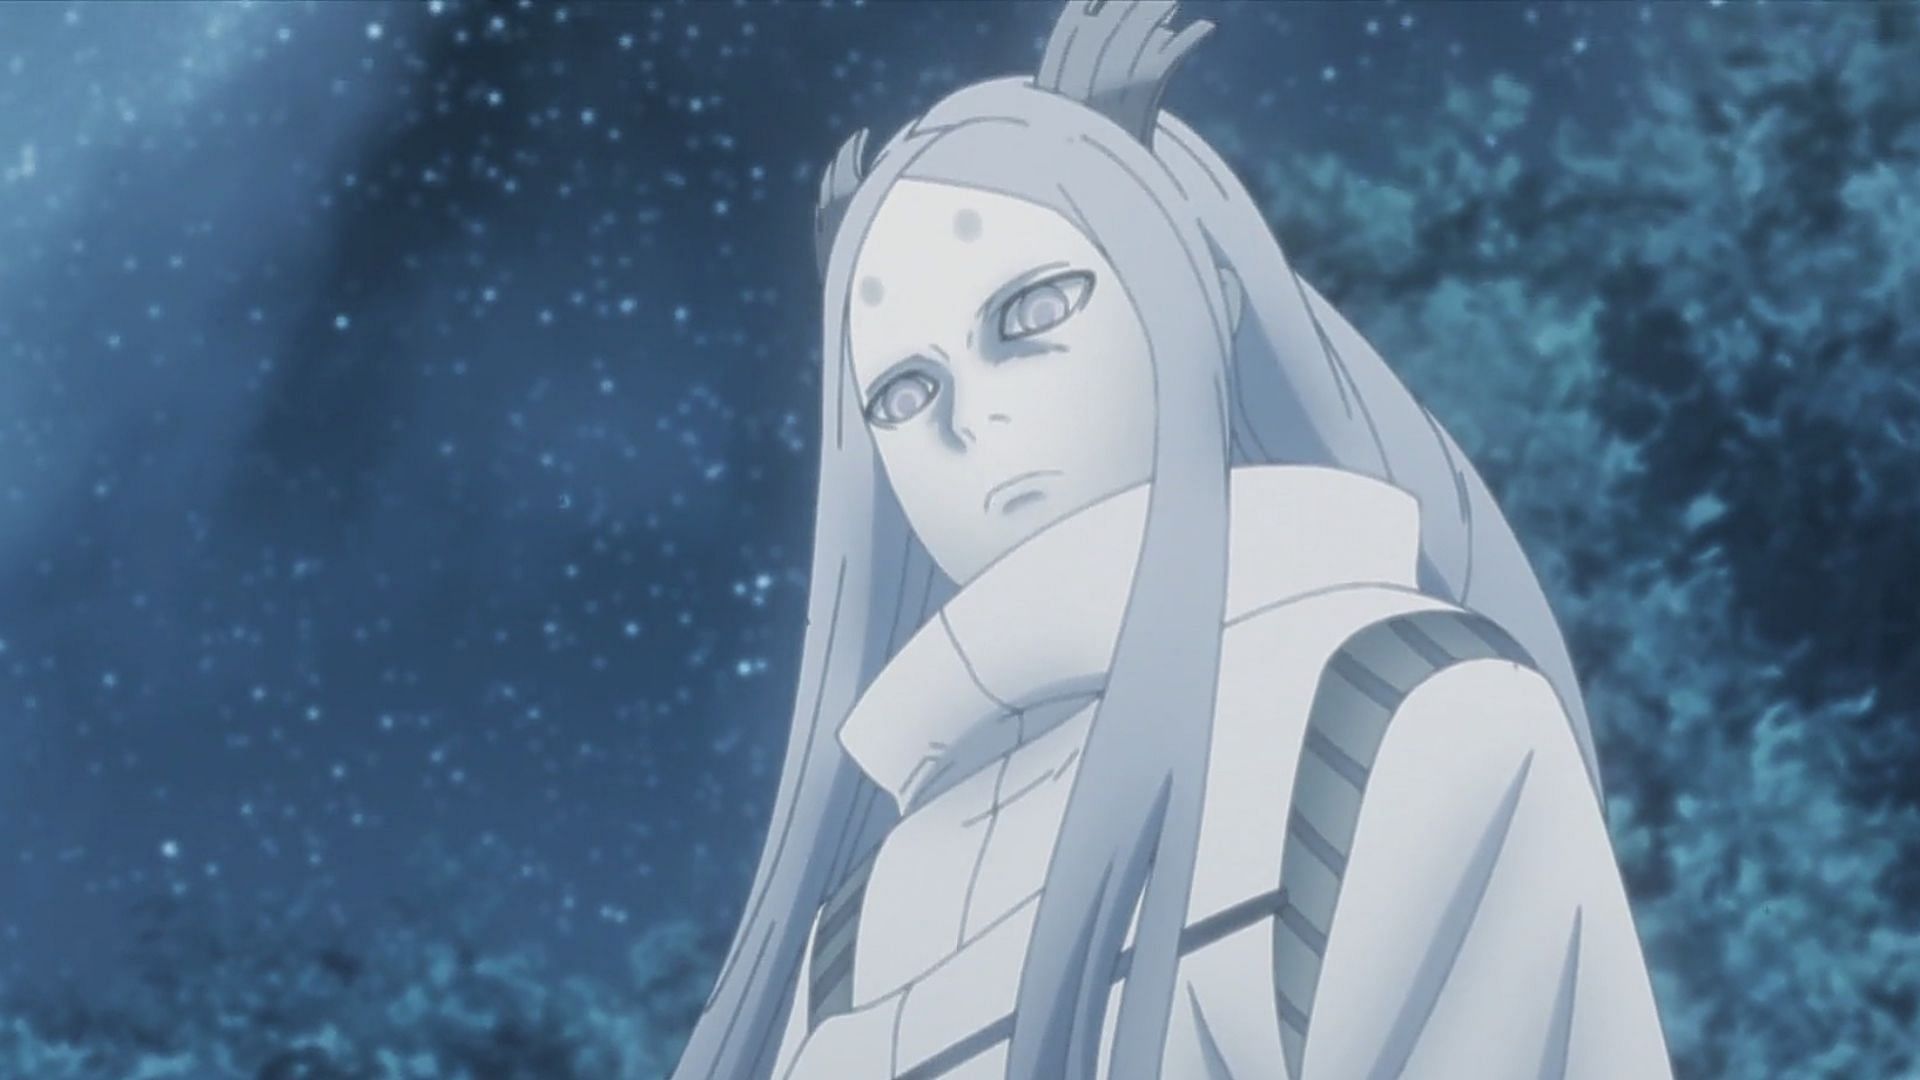 BORUTO EPISODE 291 - Naruto Returns to Battle for the First Time